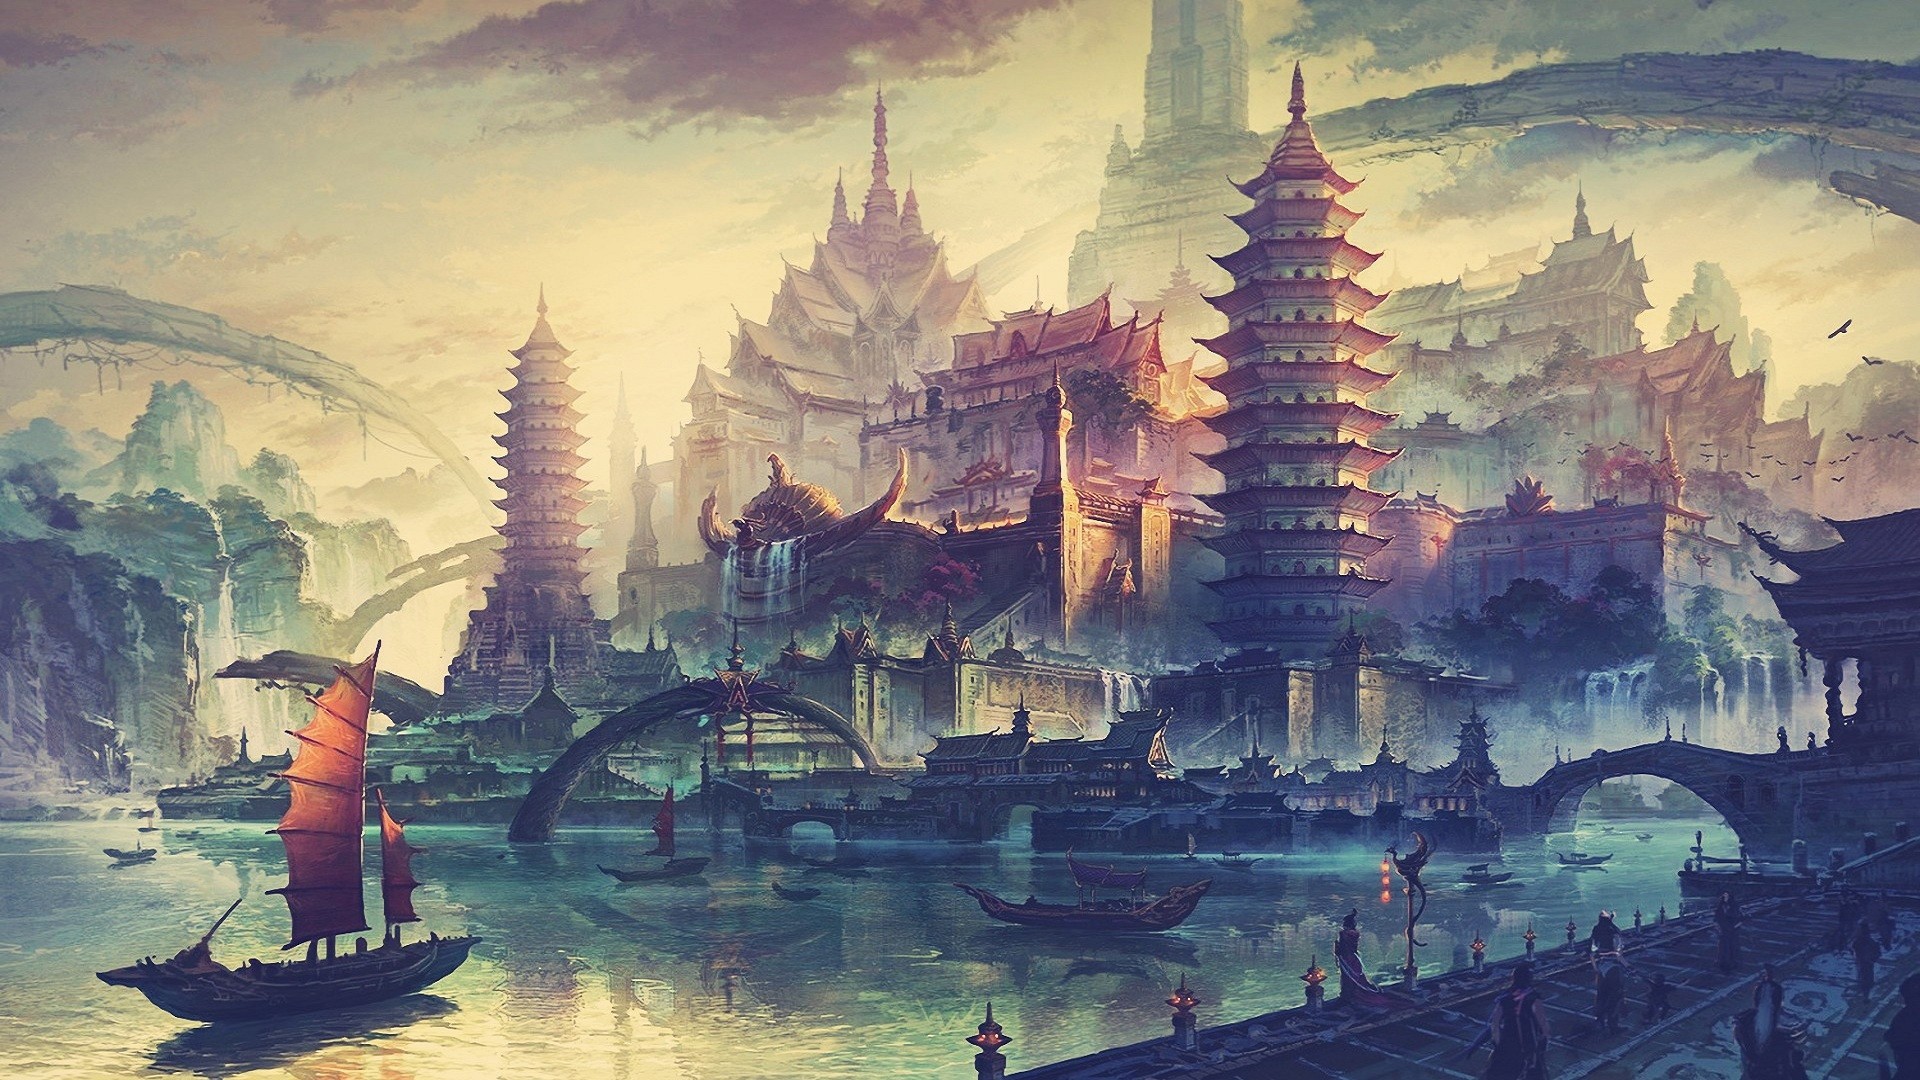 China, Fantasy art, Traditional art, Ship, Asian architecture Wallpaper HD / Desktop and Mobile Background